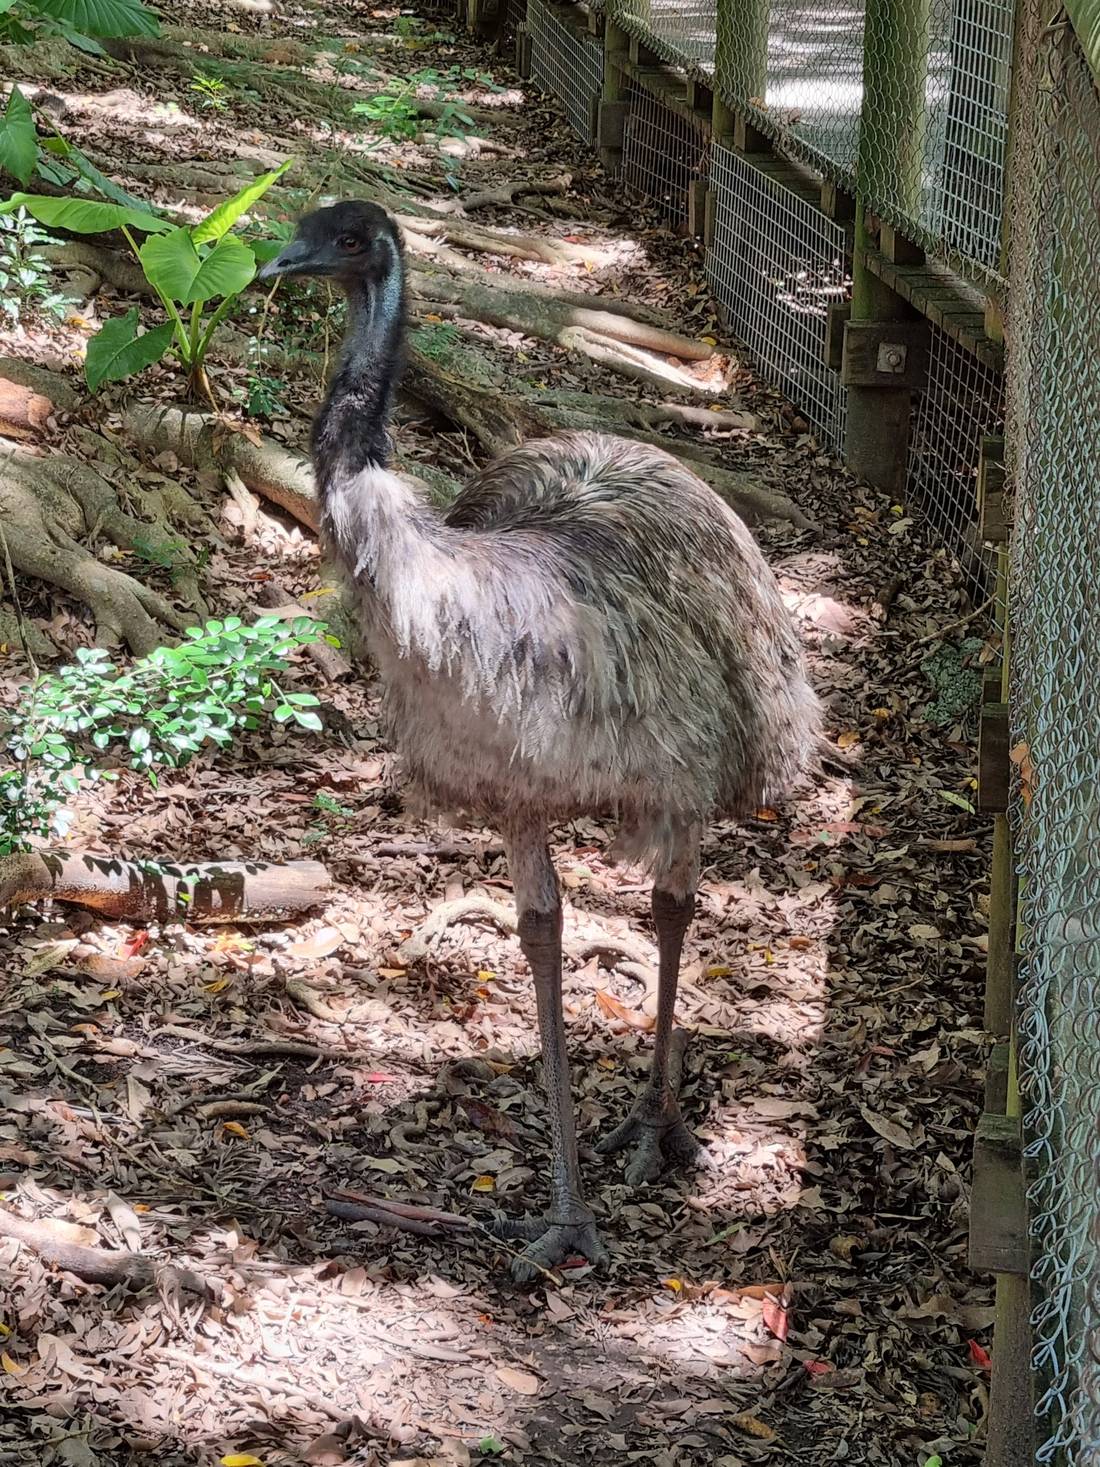 An Emu. They are very big flightless birds unique to Australia. This one reminds me of Fluffy. the parkrunning, wild emu up at Nambour.